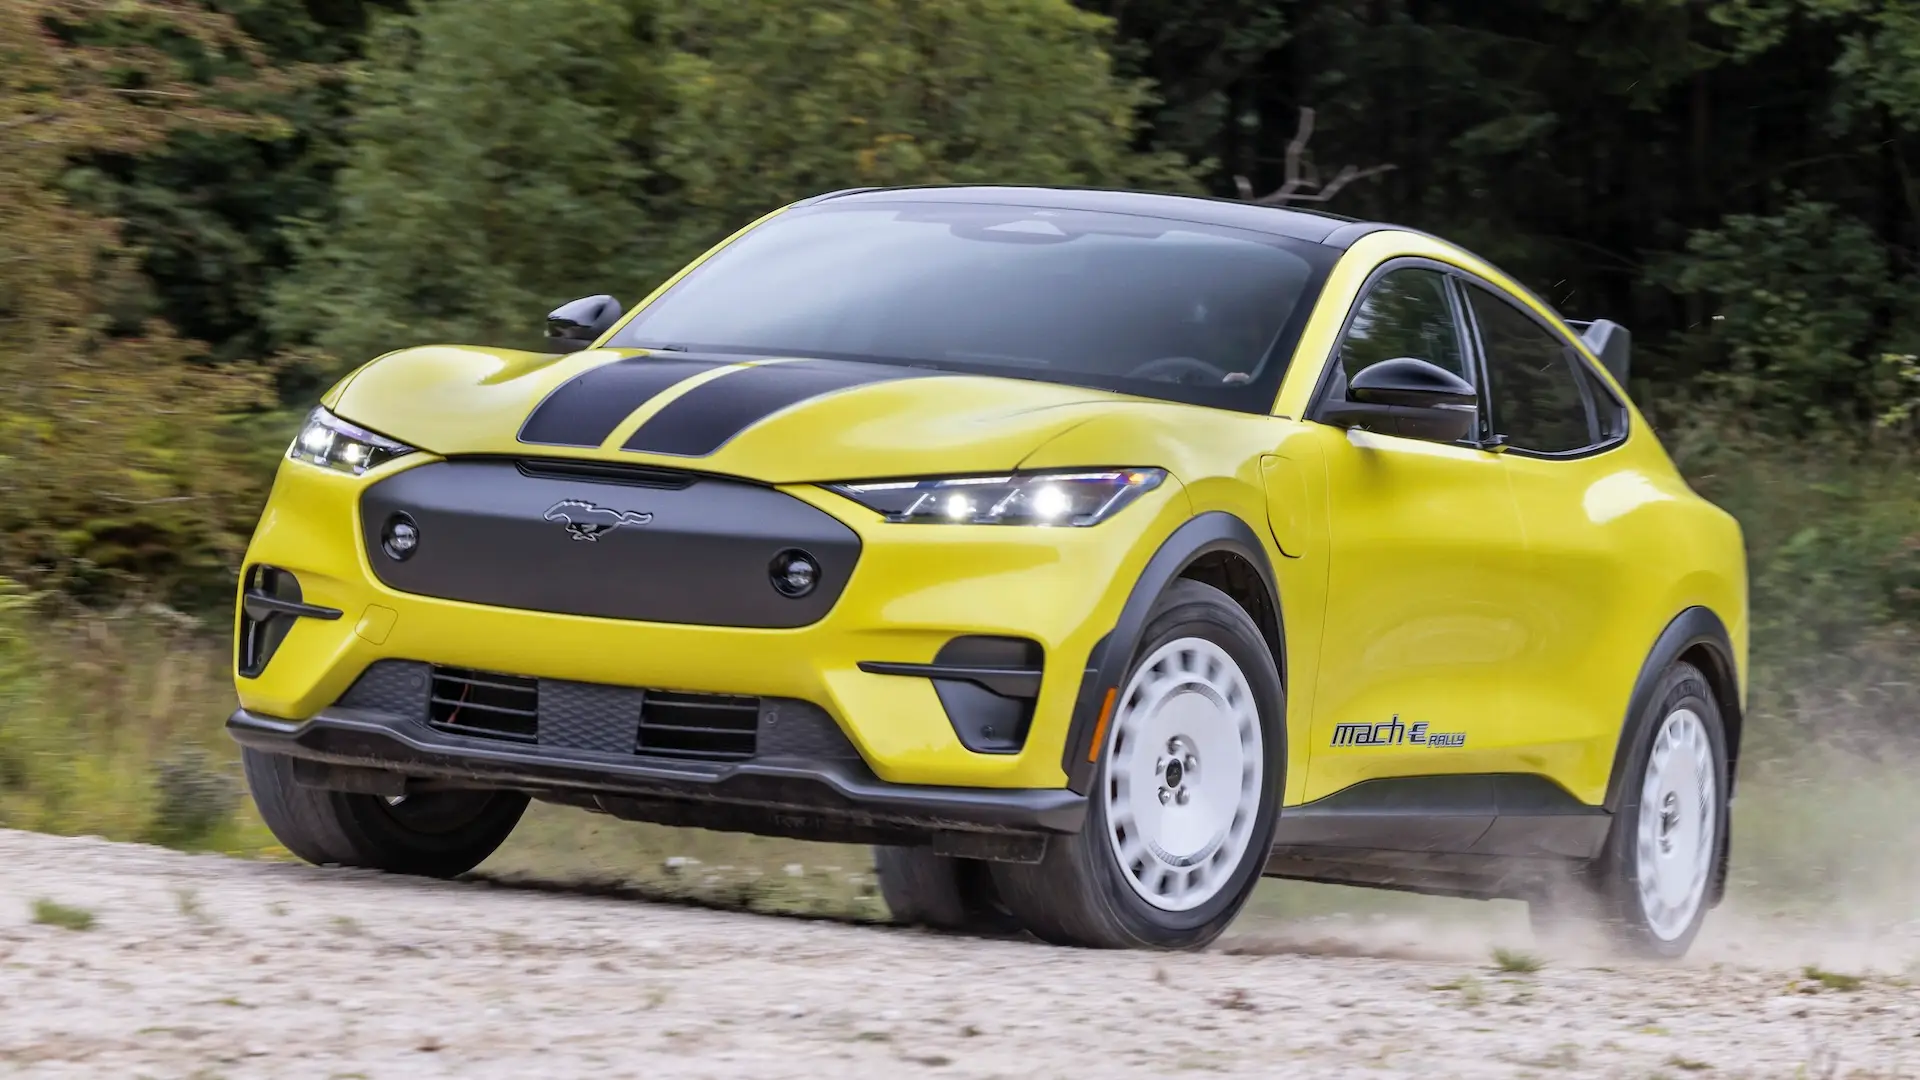 Sales soar when the Ford Mustang Mach-E goes on sale, This suggests affordable electric cars are the future